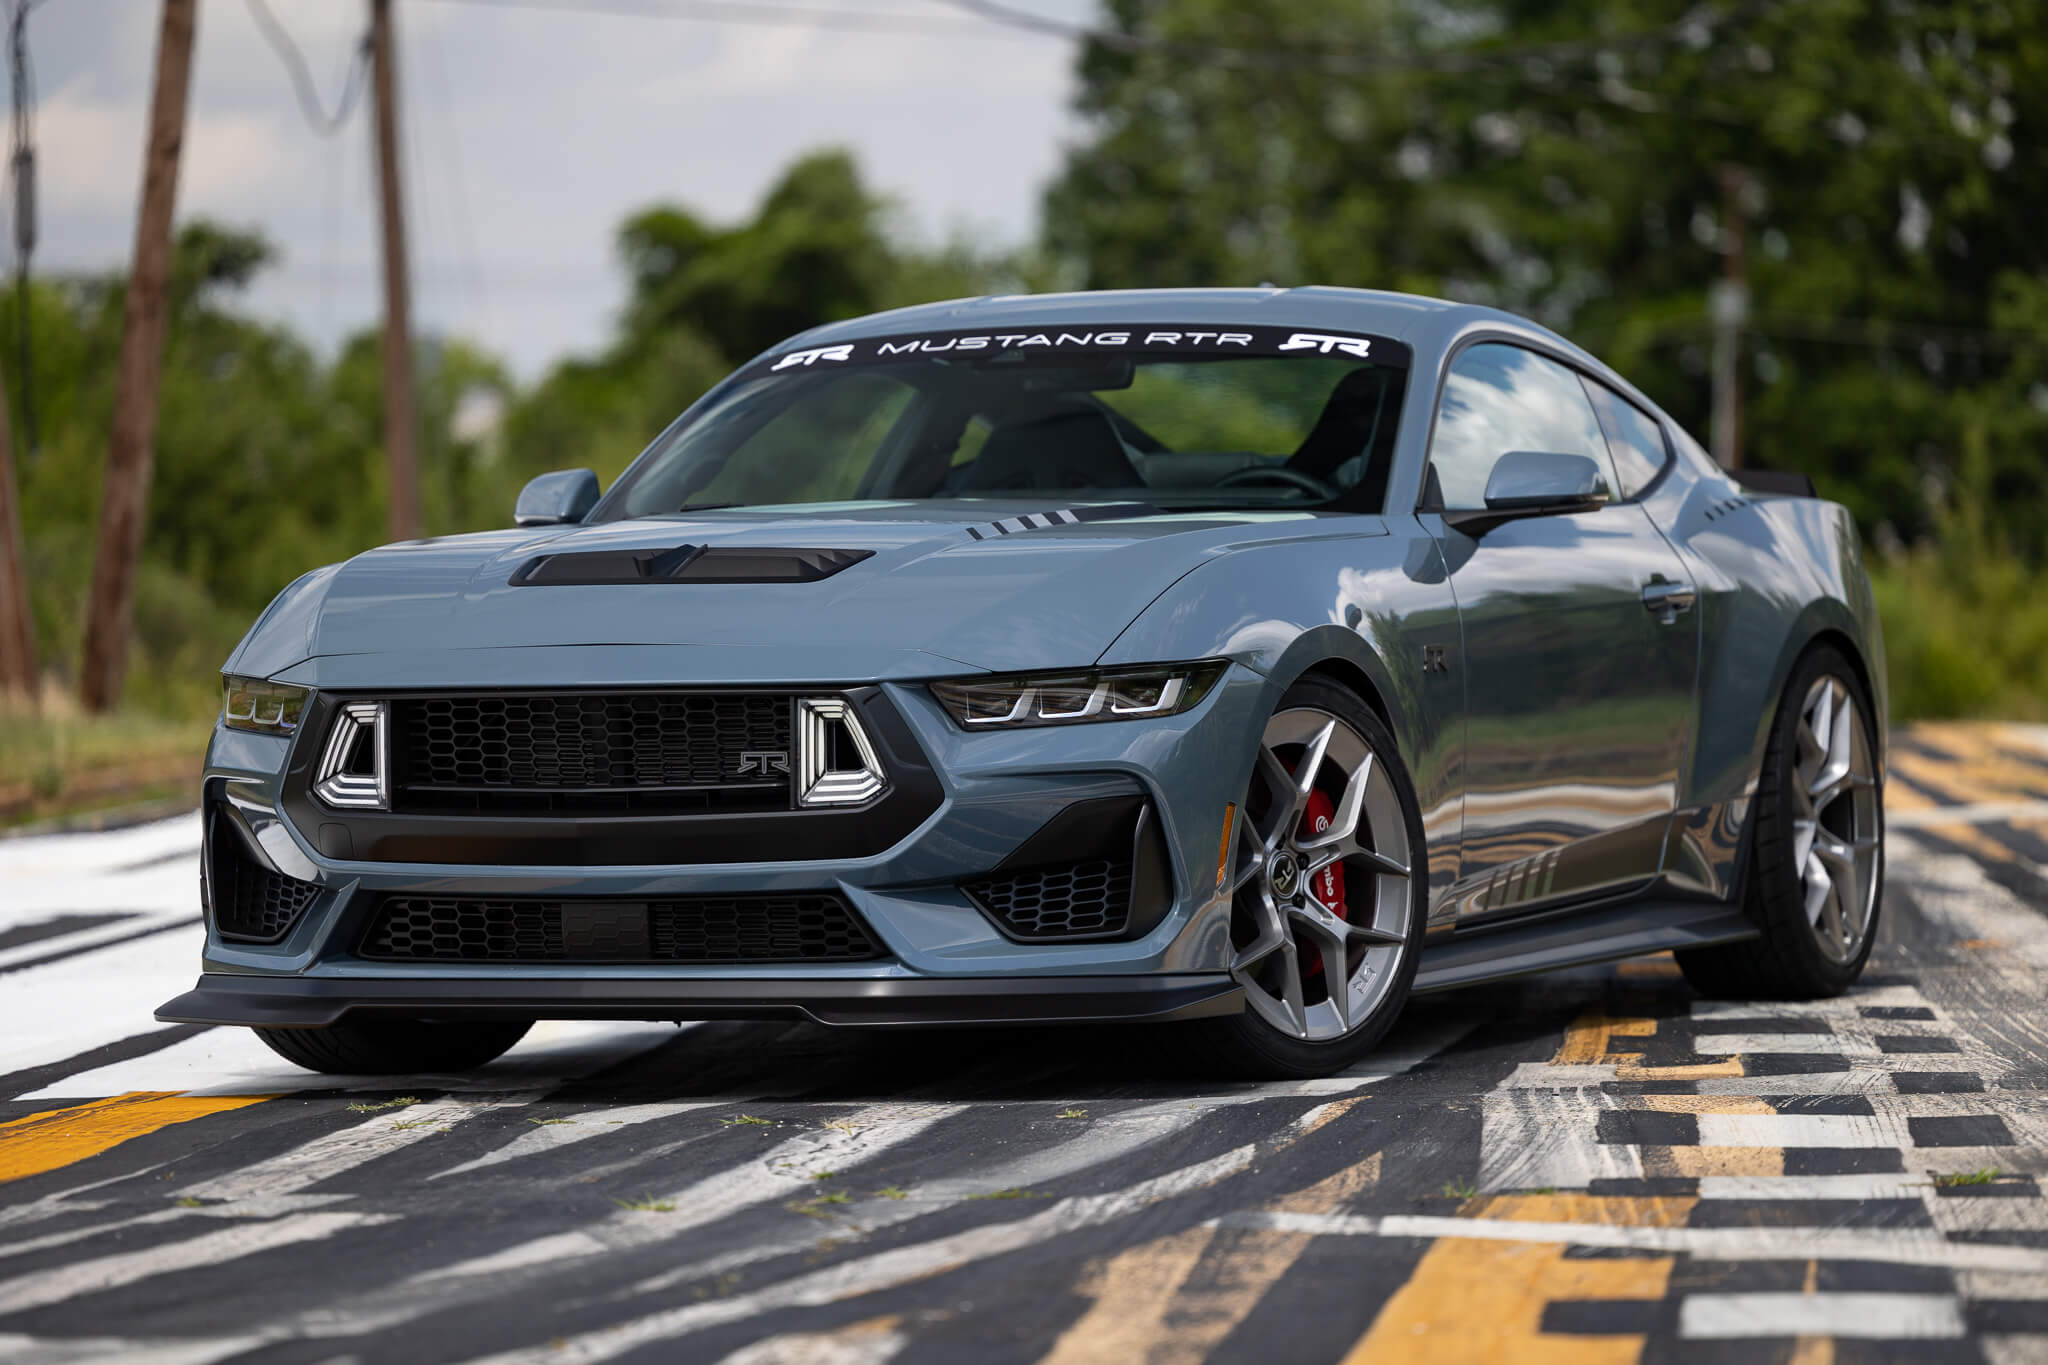 A 2024 Mustang RTR Spec 2 on a road, showcasing its RTR parts and accessories like the grille and wheels